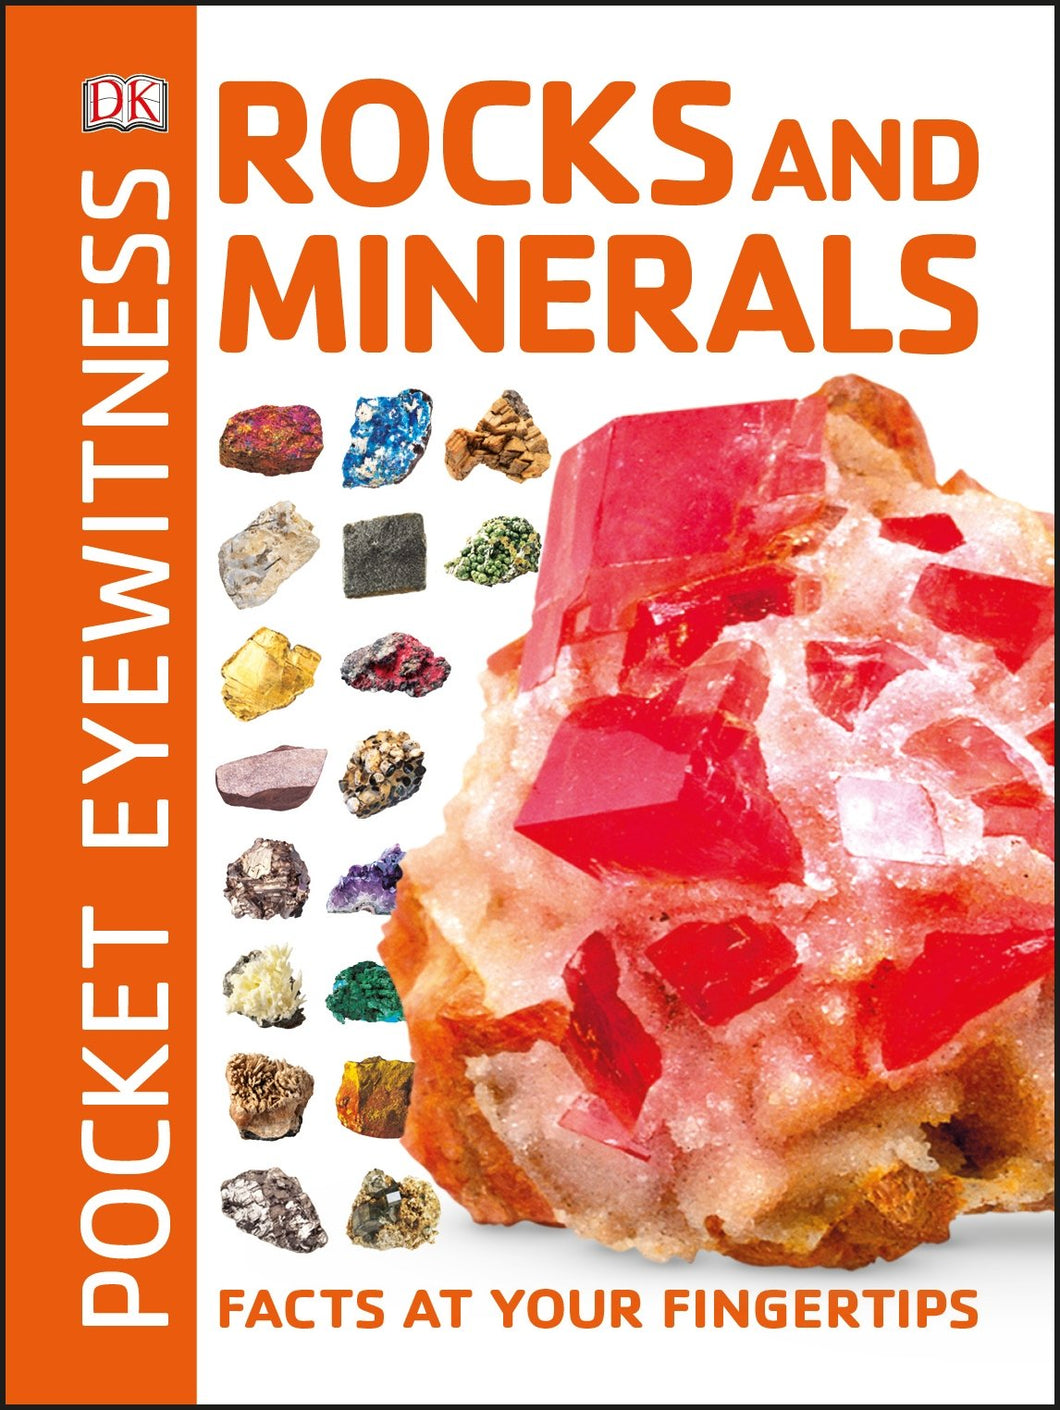 White book with orange spine and title has 18 small photographs of rocks and minerals, and one large that takes up a third of the cover. 